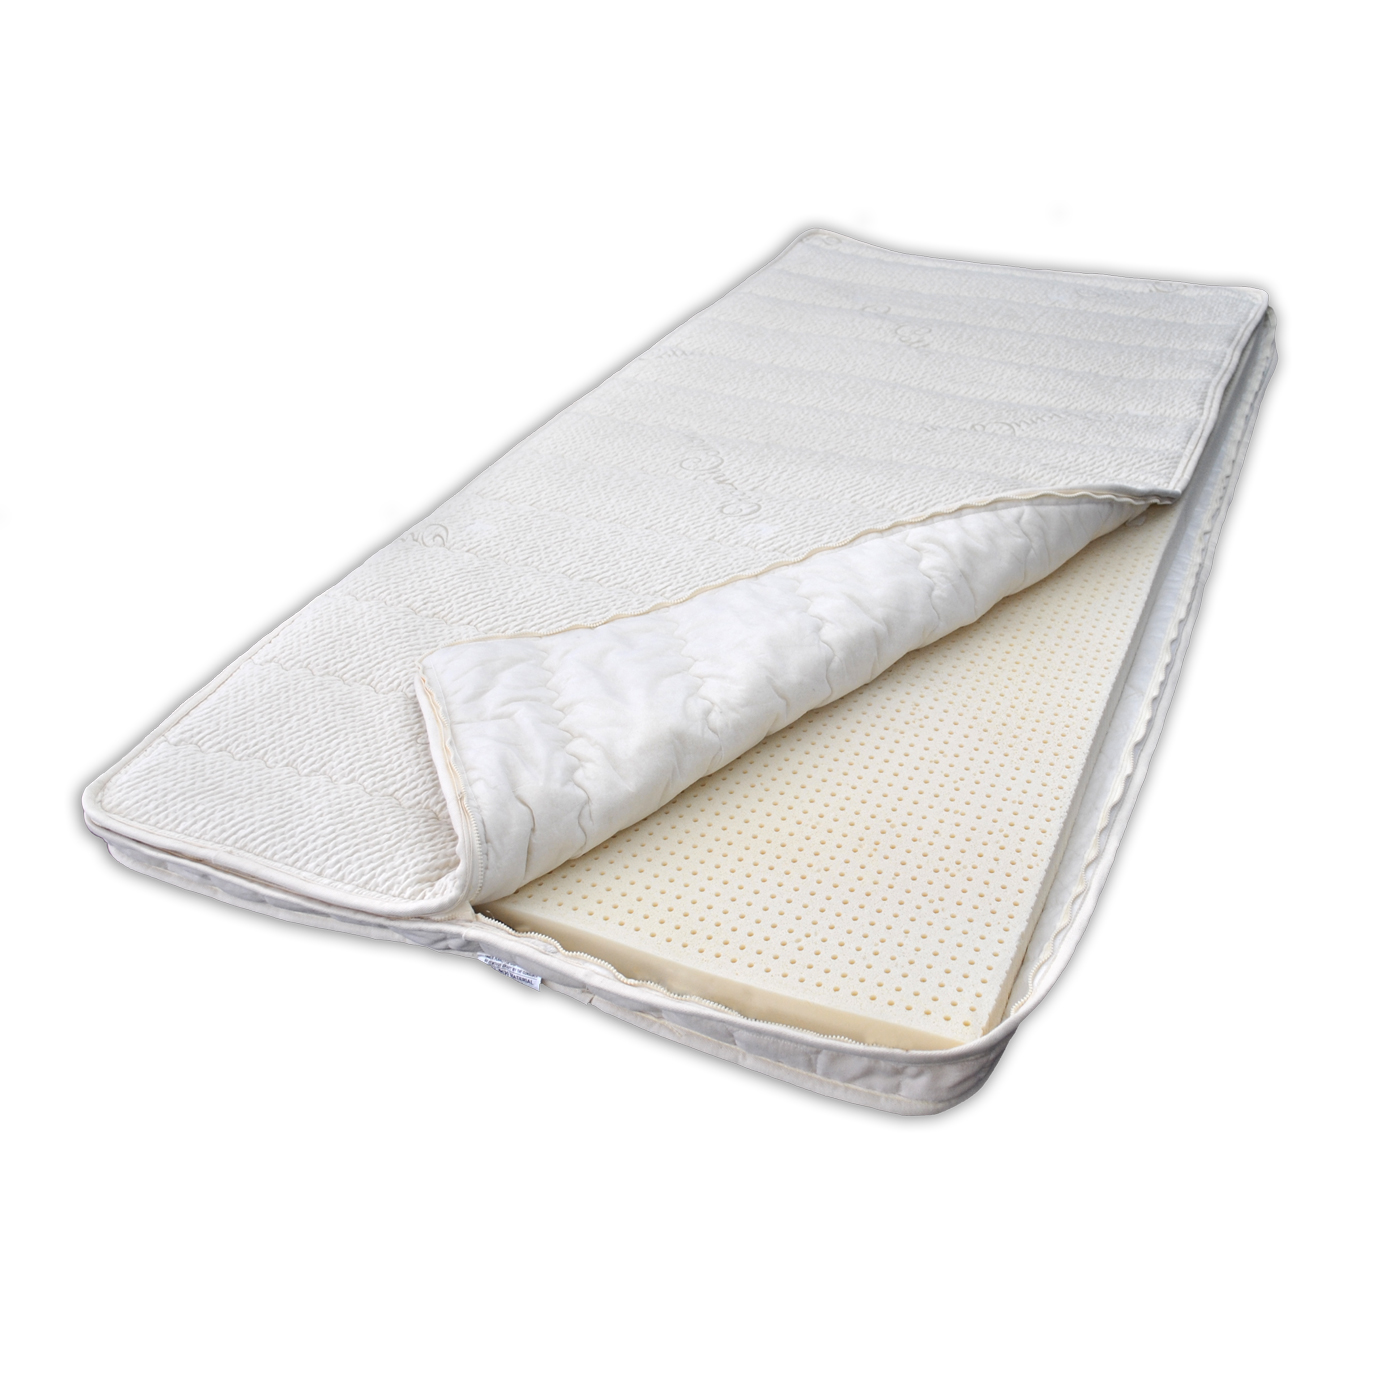 highest rated Soft Latex Mattress Pad Topper